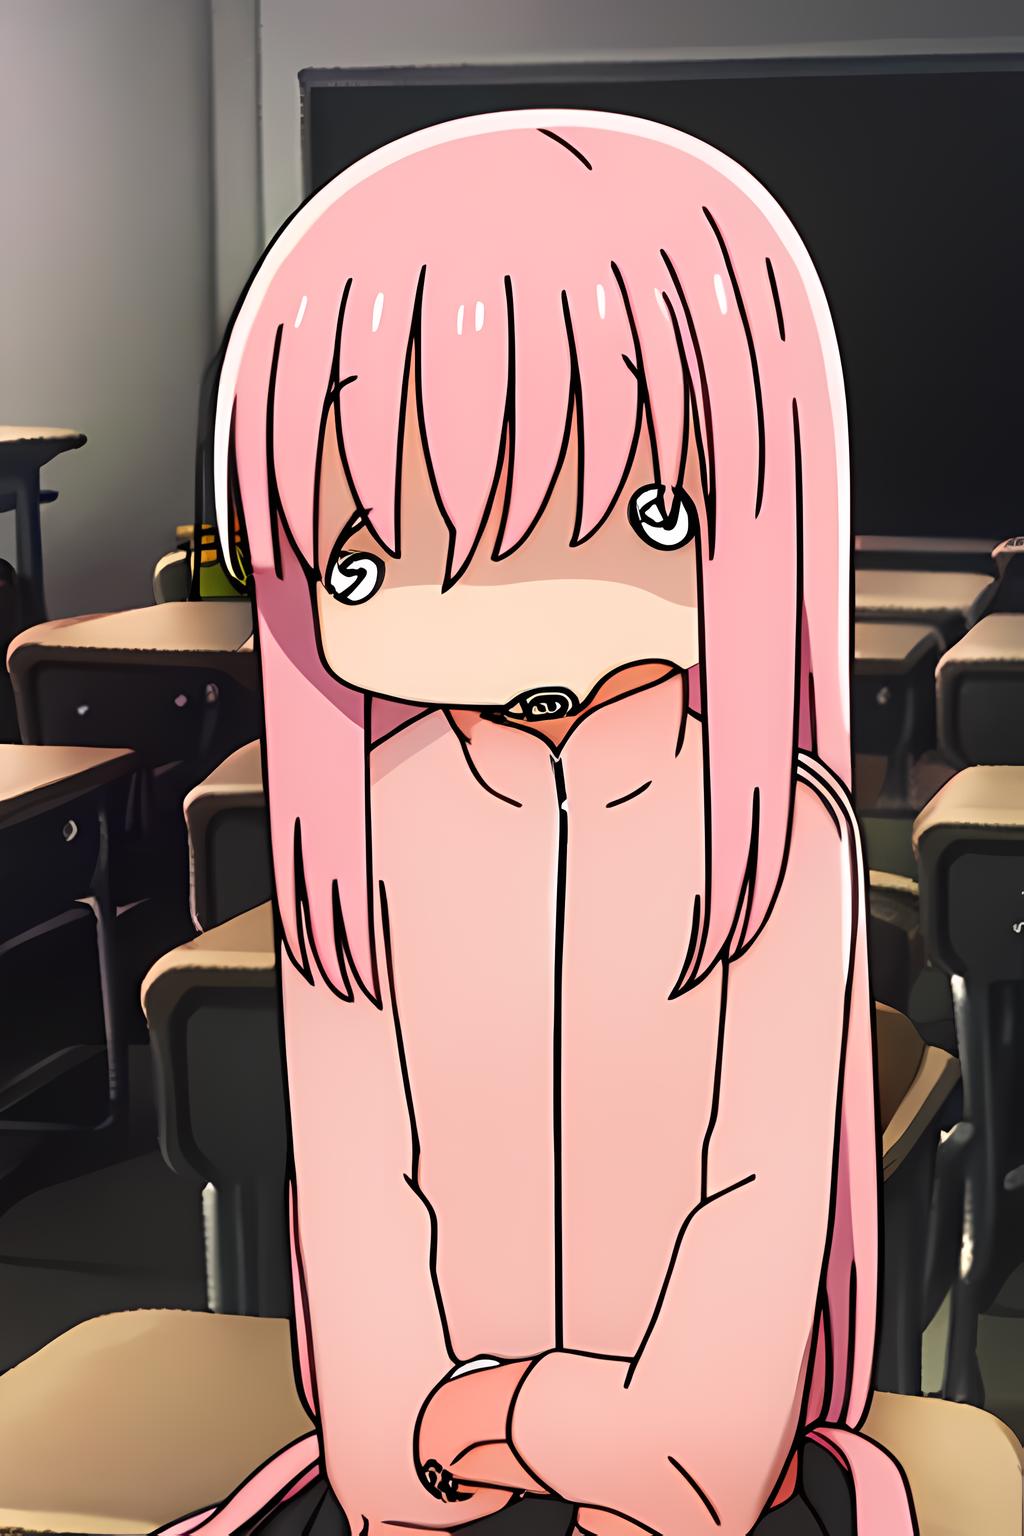 A cartoon girl with pink hair sitting in a classroom.